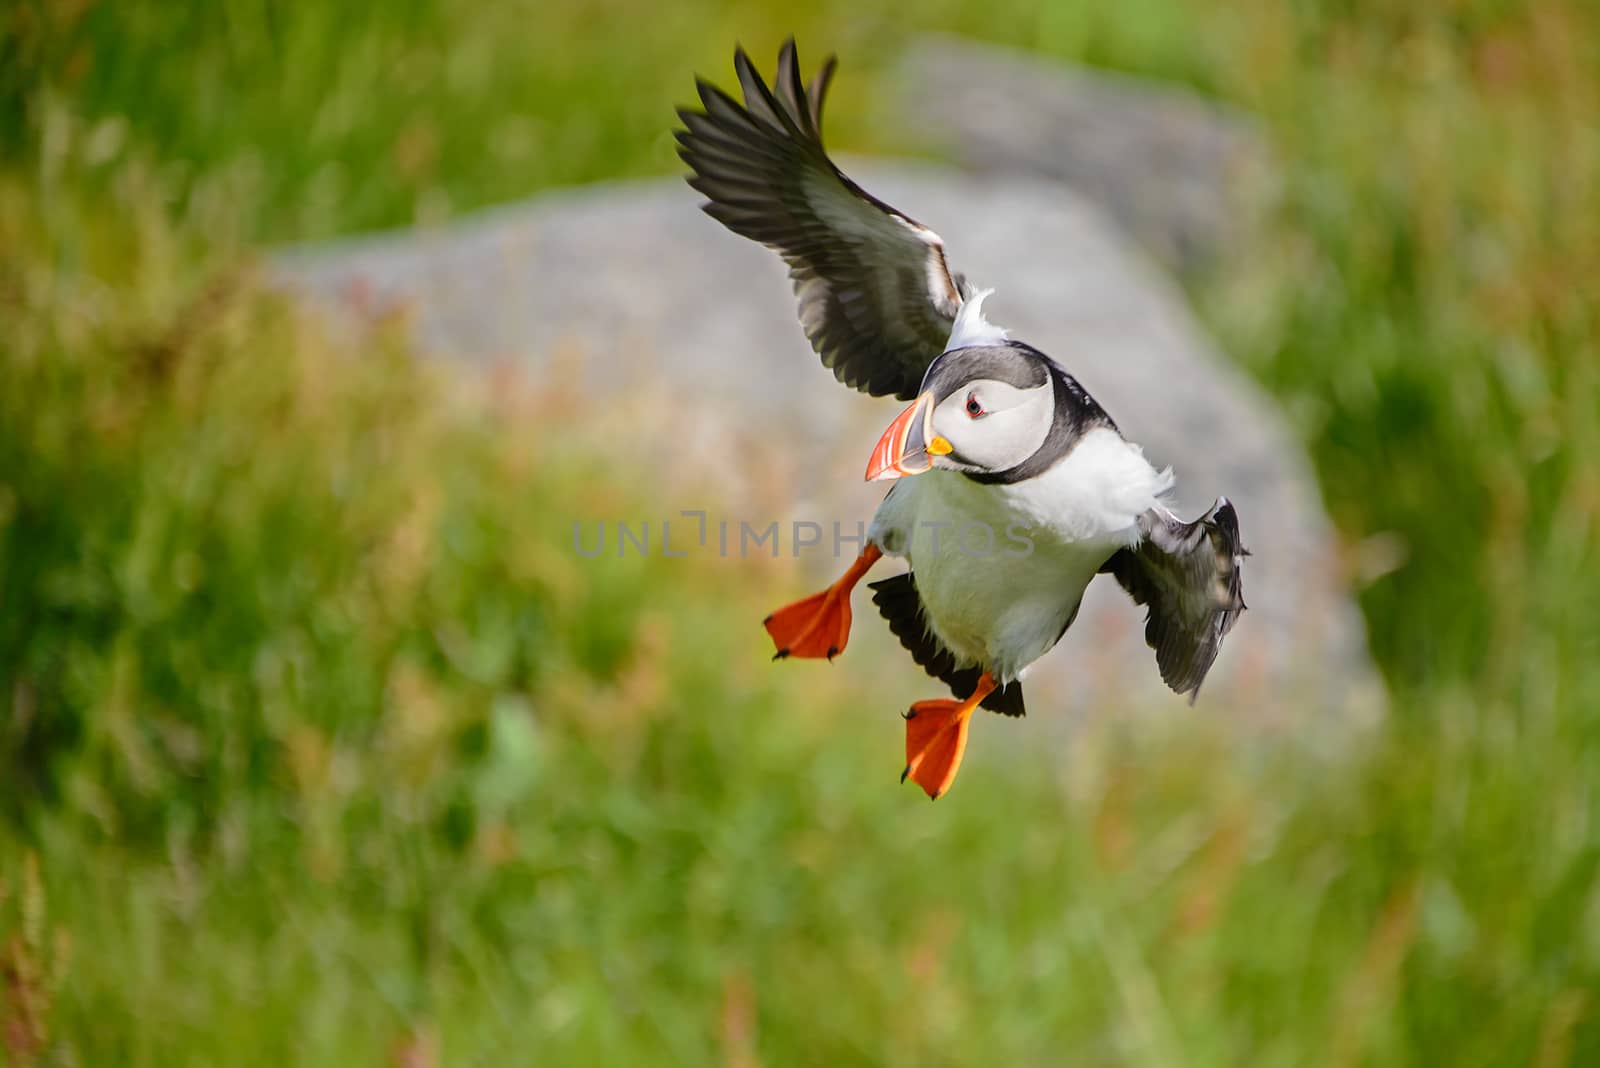 Atlantic puffin, fratercula arctica, a sea bird landing with wings outstretched  from a foraging flight from the sea towards its burrow.
